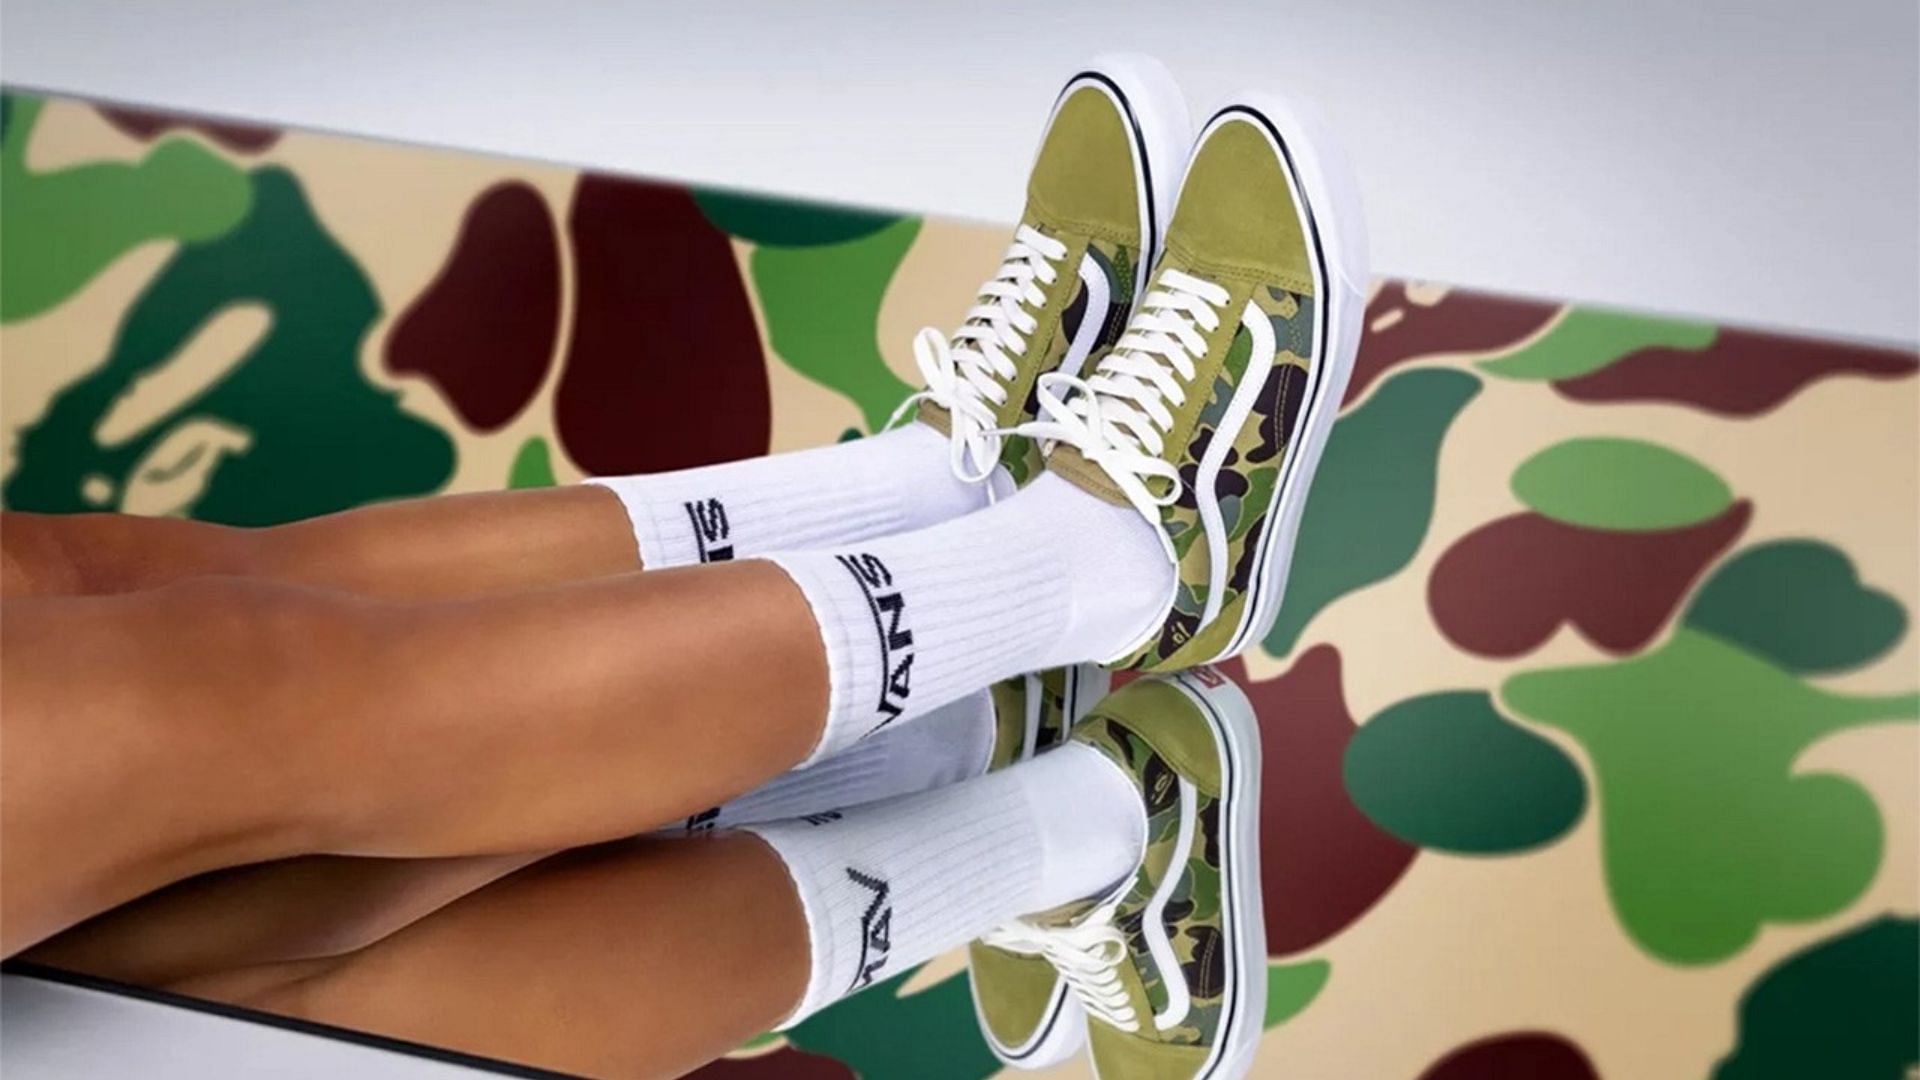 BAPE collaborated with the skateboarding label for a camo-inspired collection (Image via BAPE)